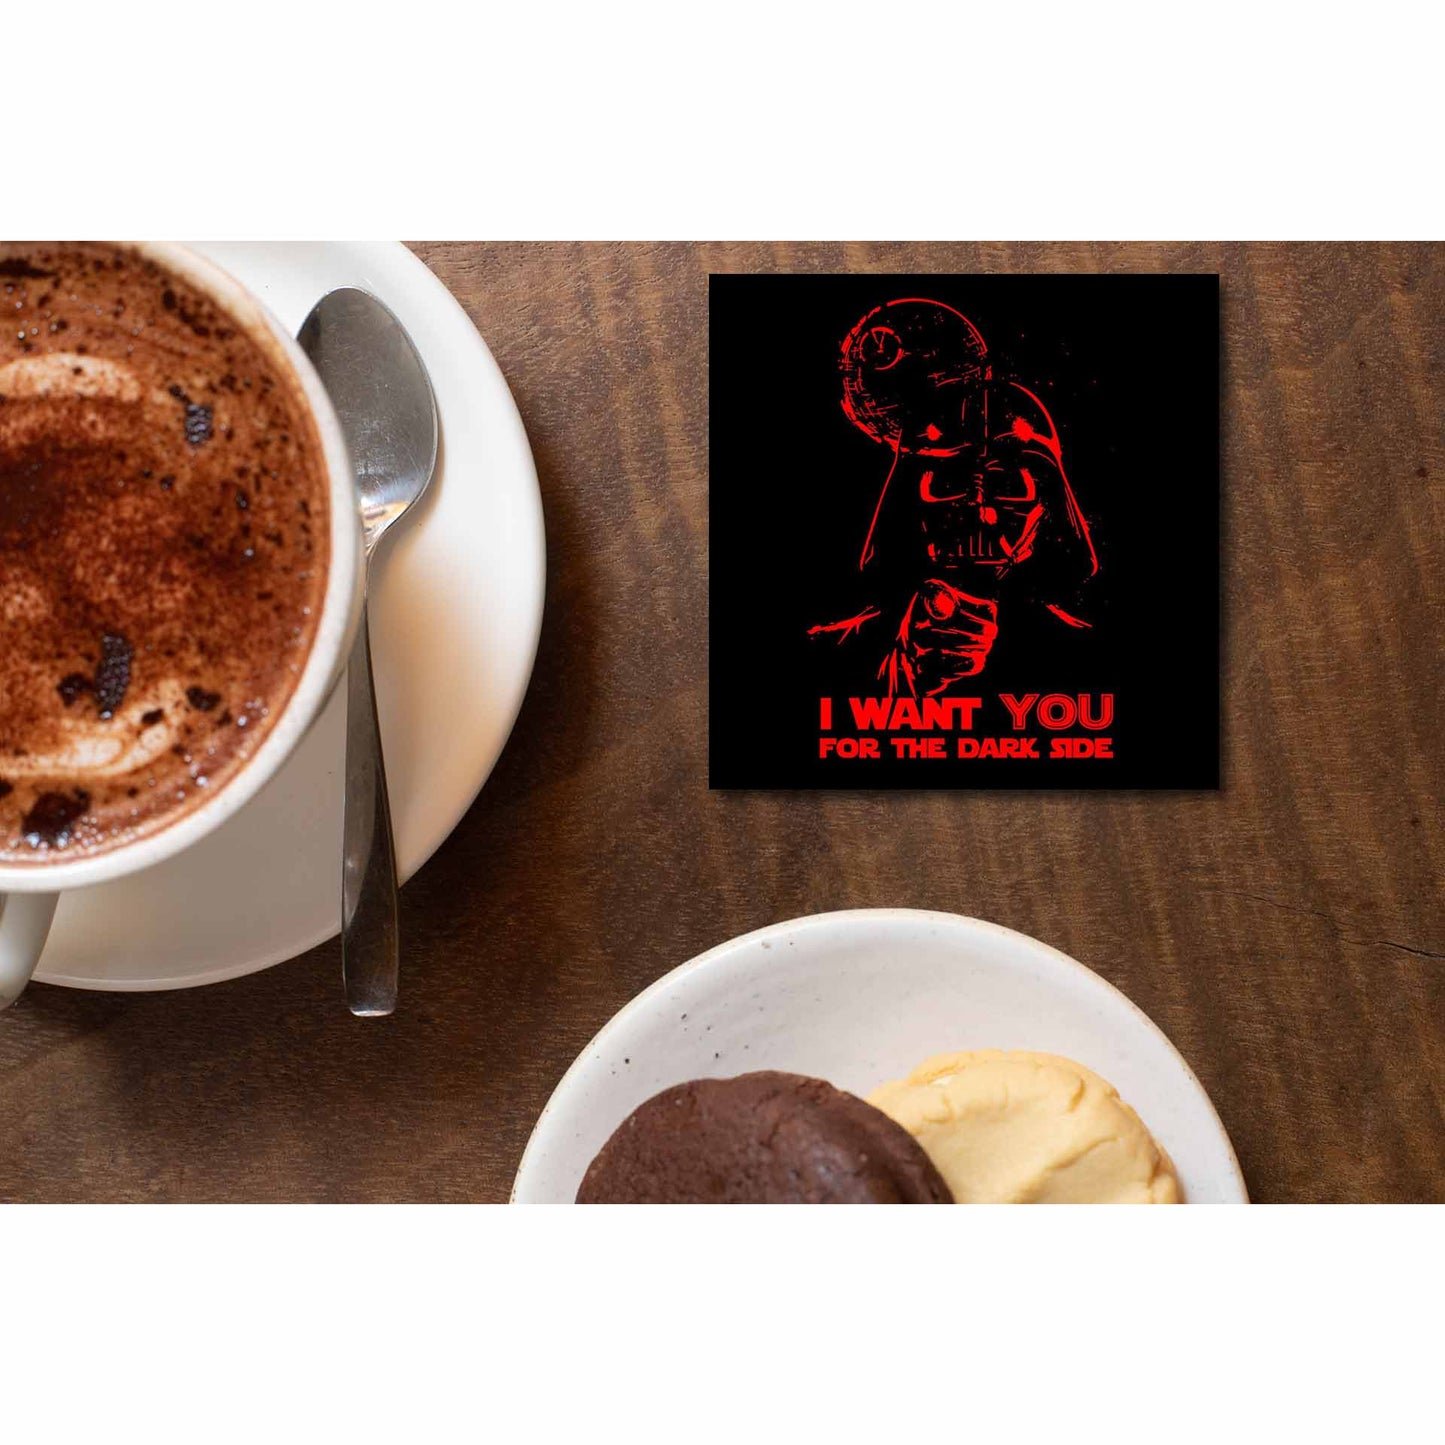 star wars i want you for the dark side coasters wooden table cups indian tv & movies buy online india the banyan tee tbt men women girls boys unisex  darth vader